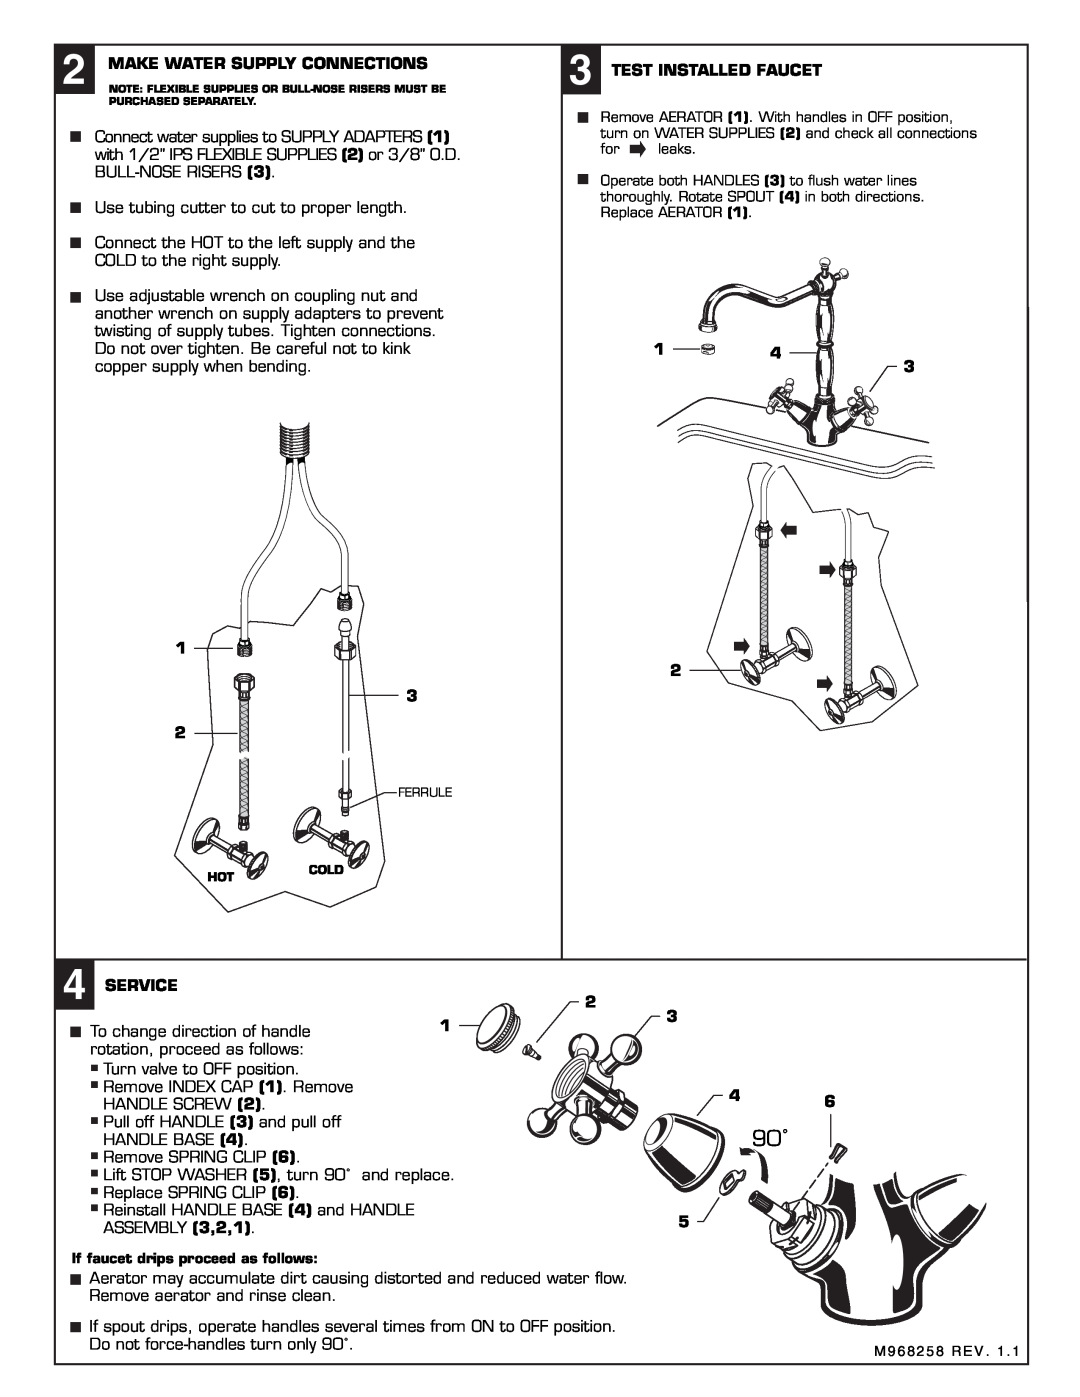 American Standard 4233.400 installation instructions Make Water Supply Connections, Test Installed Faucet,  Service 